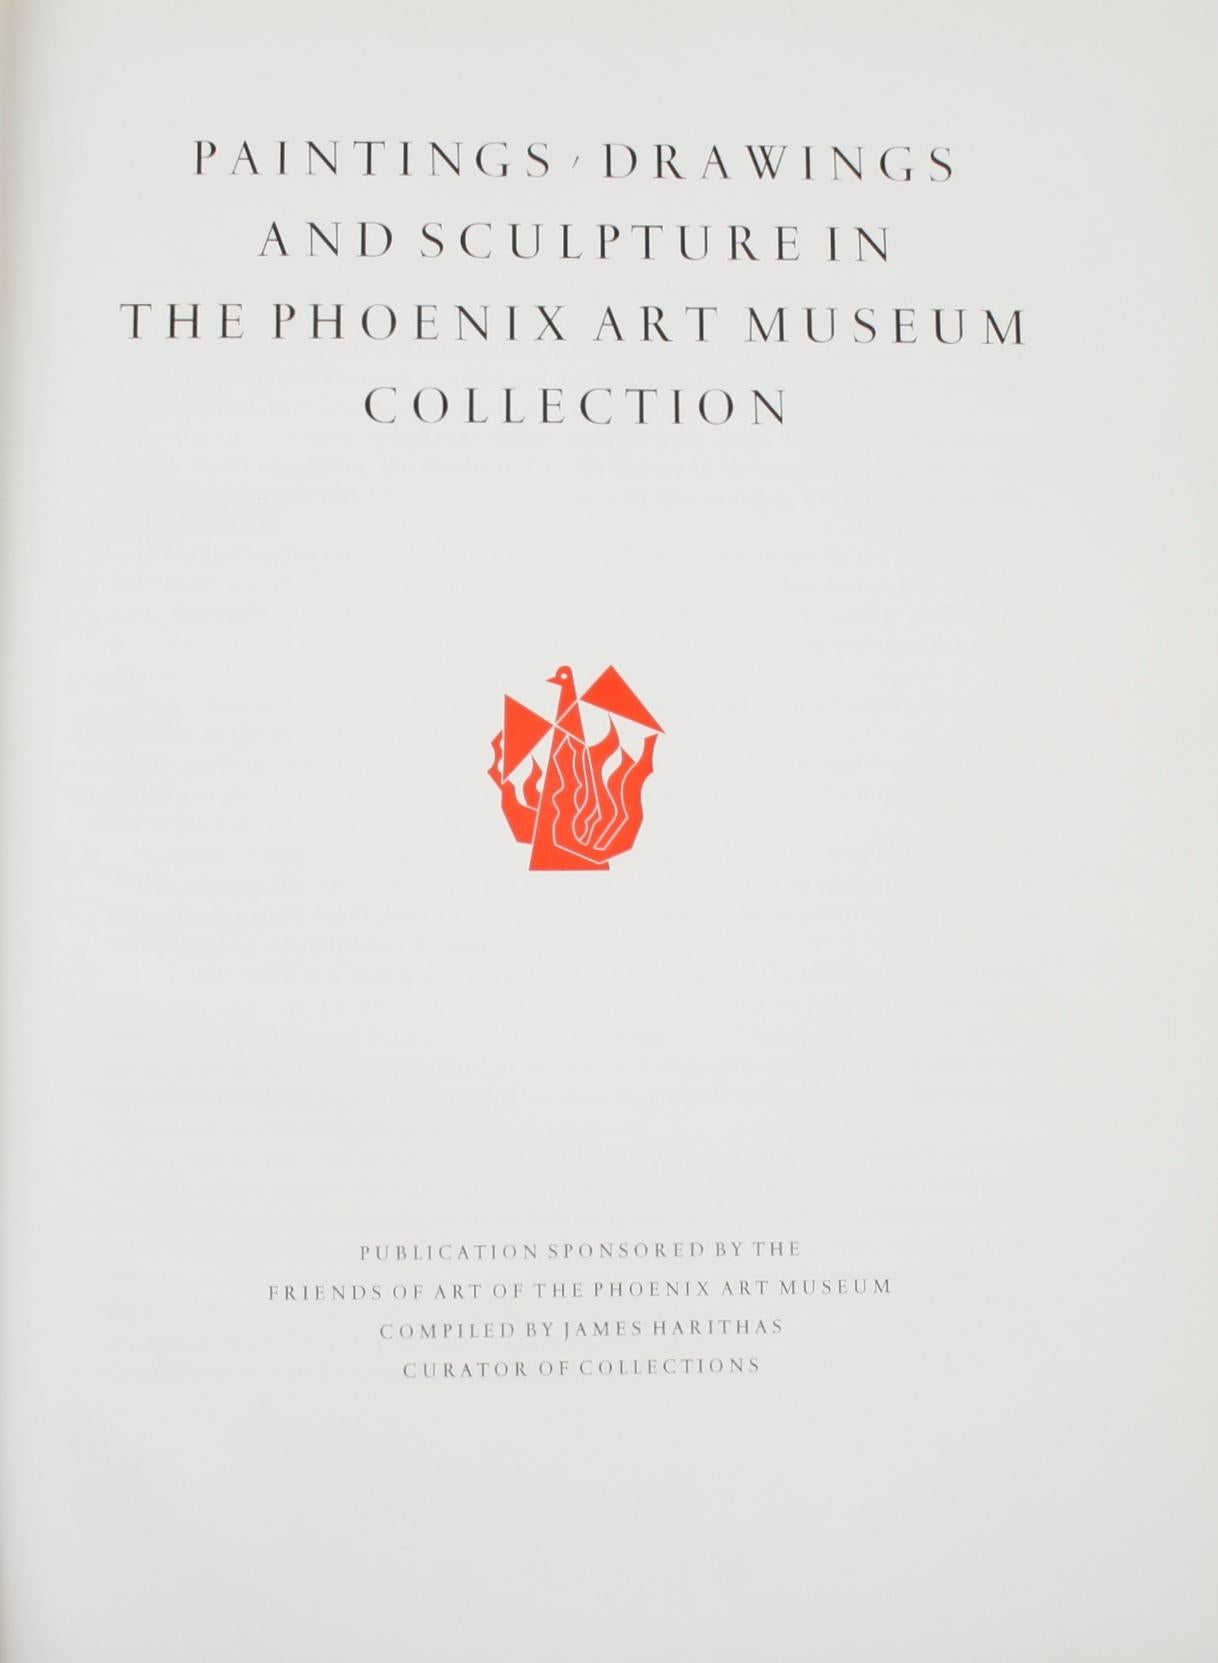 Paintings drawings and sculpture in the Phoenix Art Museum collection by James Harithas, Compiler. Phoenix Art Museum, Phoenix, 1965. 1st Ed hardcover with dust jacket. 226 pages. Of note is the French collection spanning three hundred years,